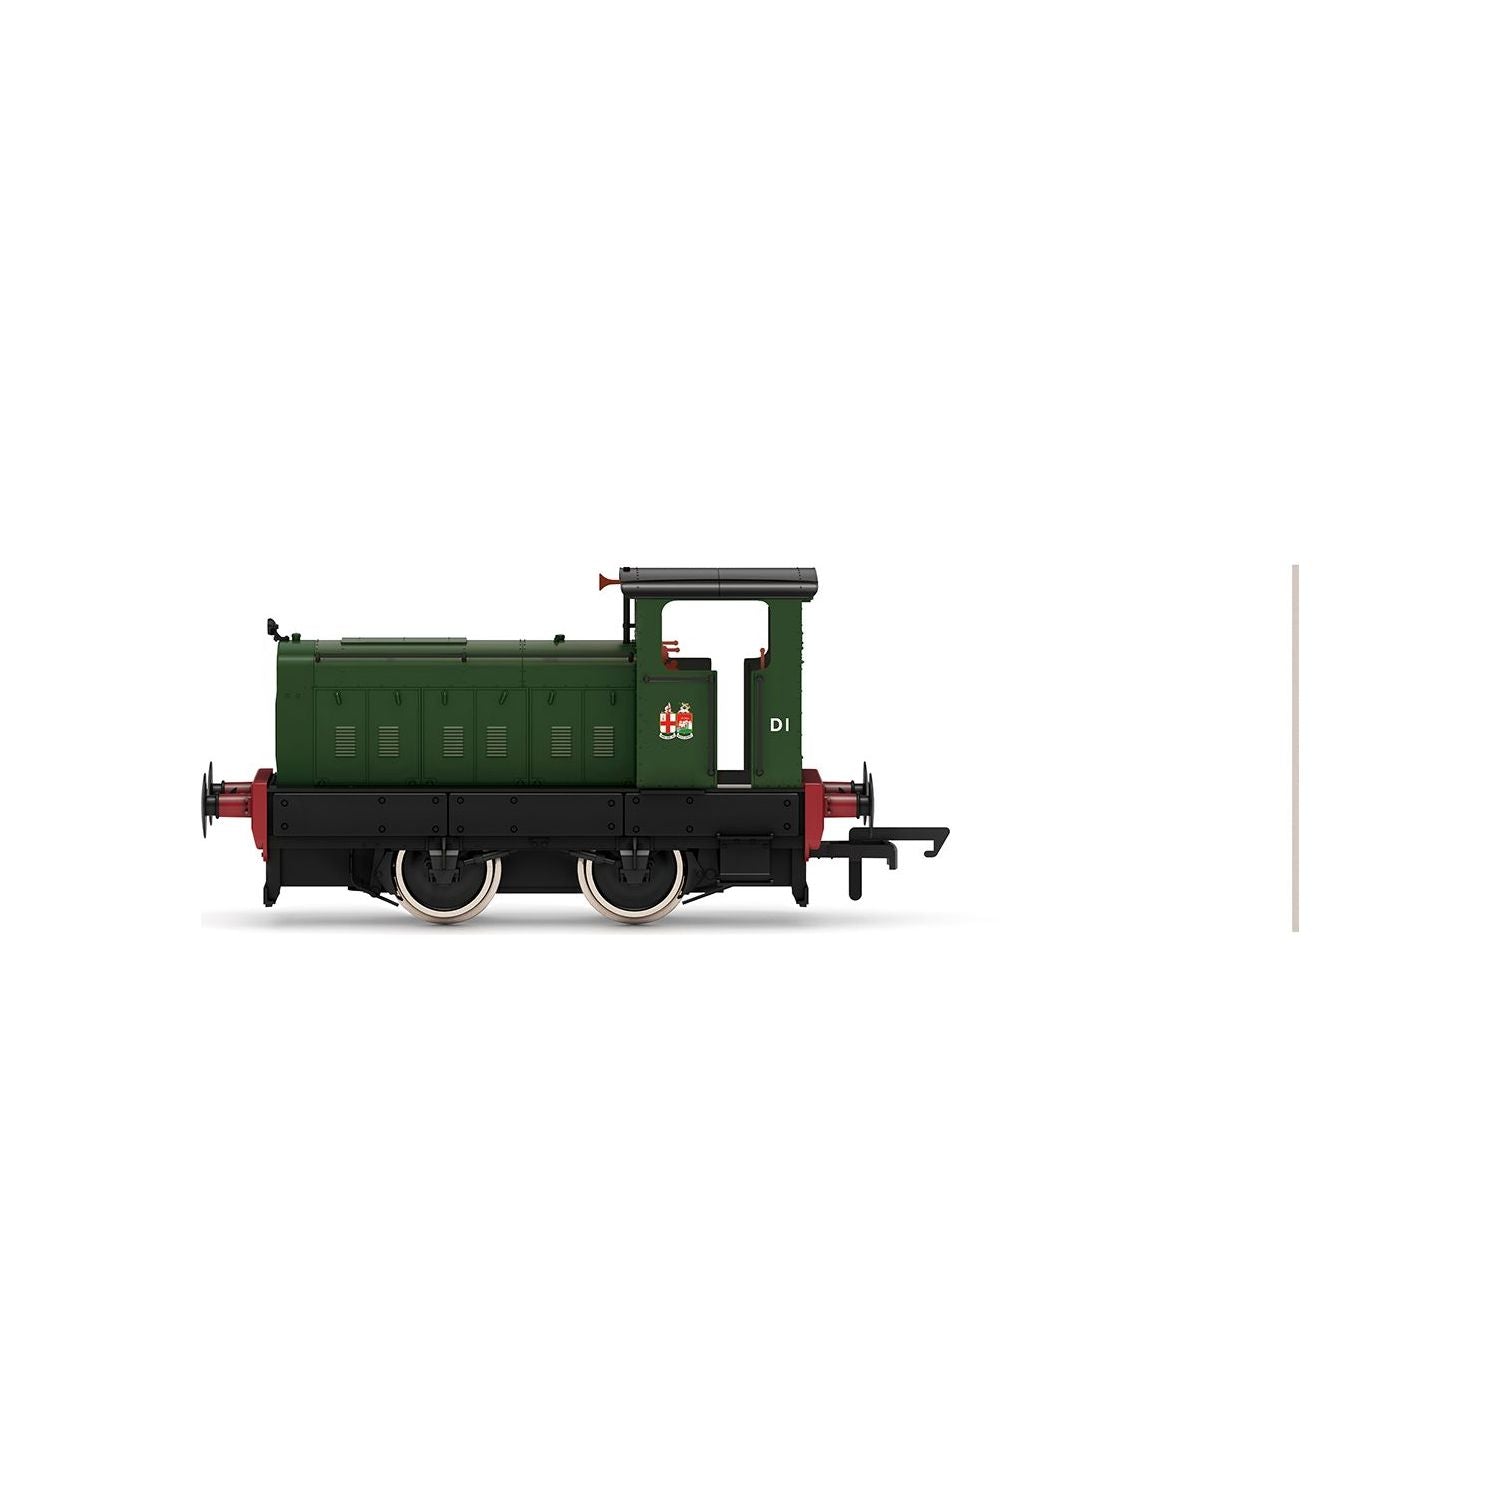 HORNBY GWR, Ruston and Hornsby 88DS, 0-4-0, D1 - Era 7